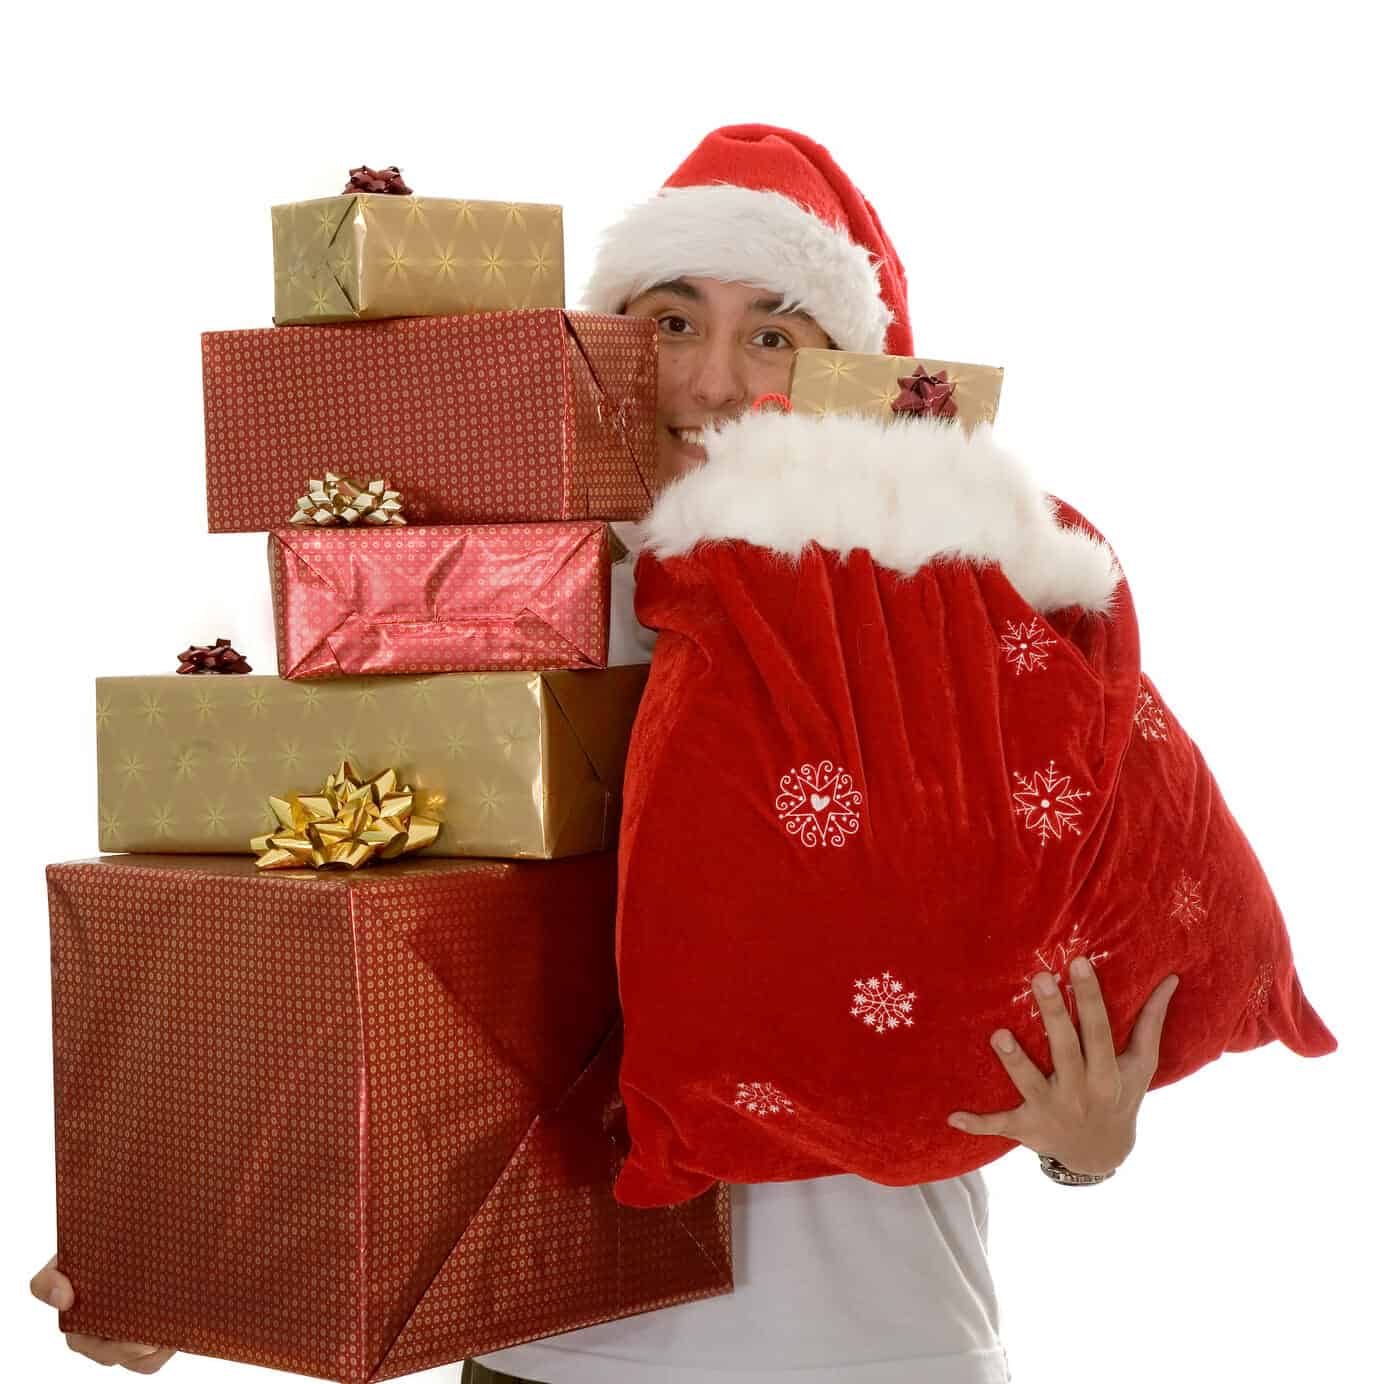 Man carrying Christmas gifts